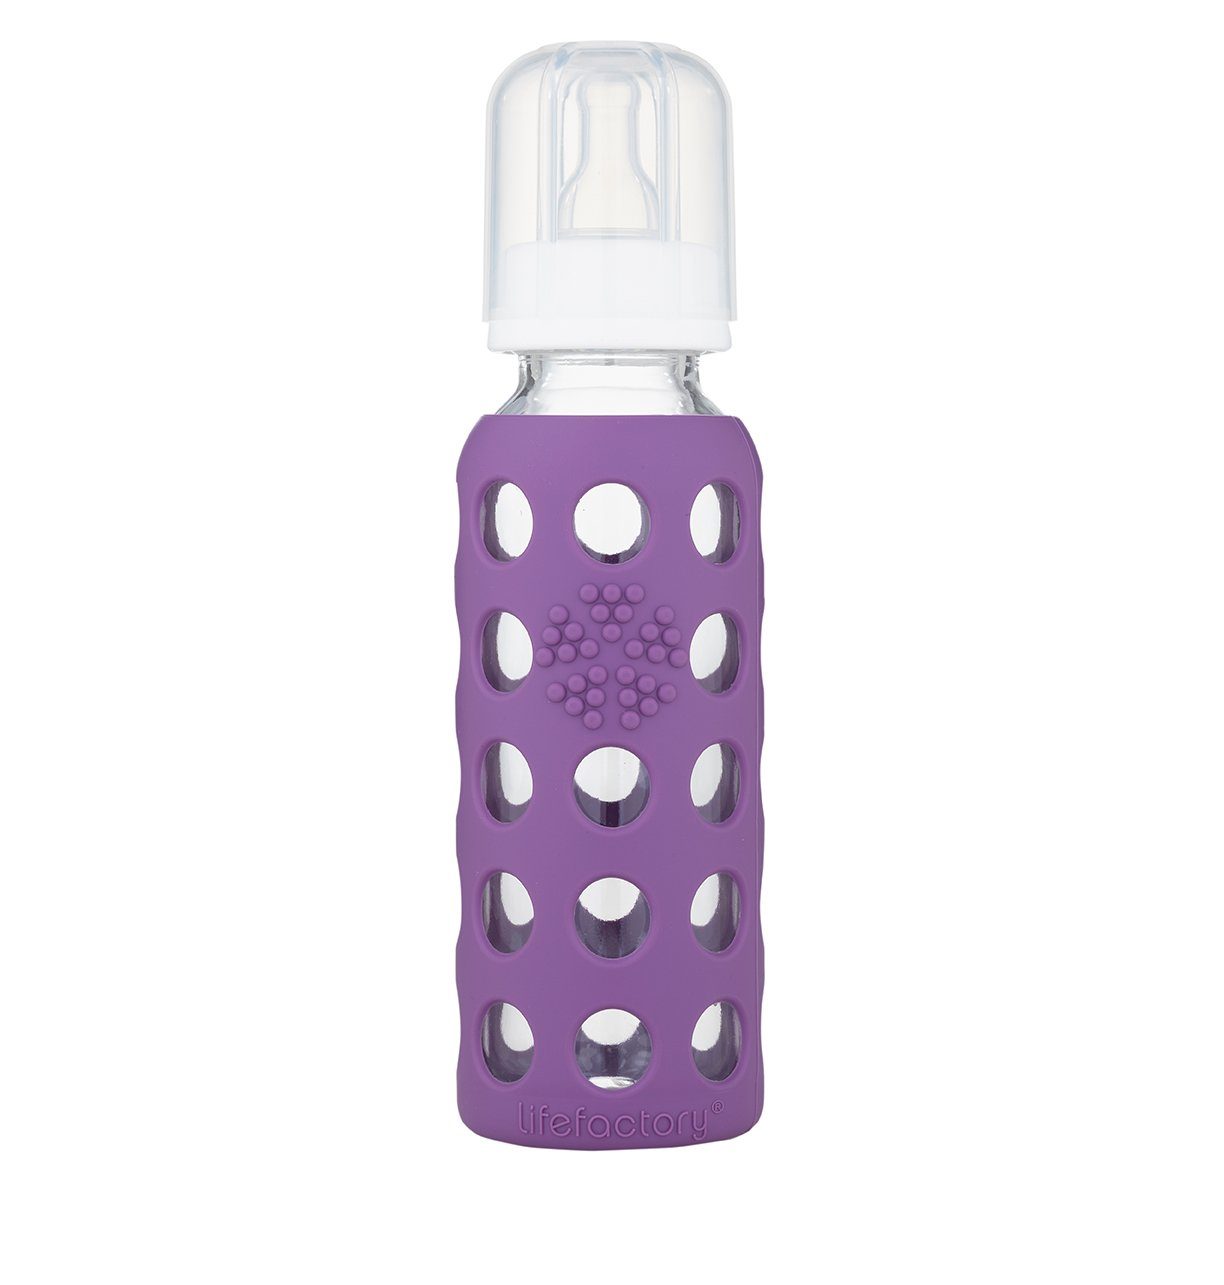 Silikonsauger Glasflasche Gr. 250ml, (3-6 grape Babyflasche, 2 Baby Lifefactory Monate) inkl.